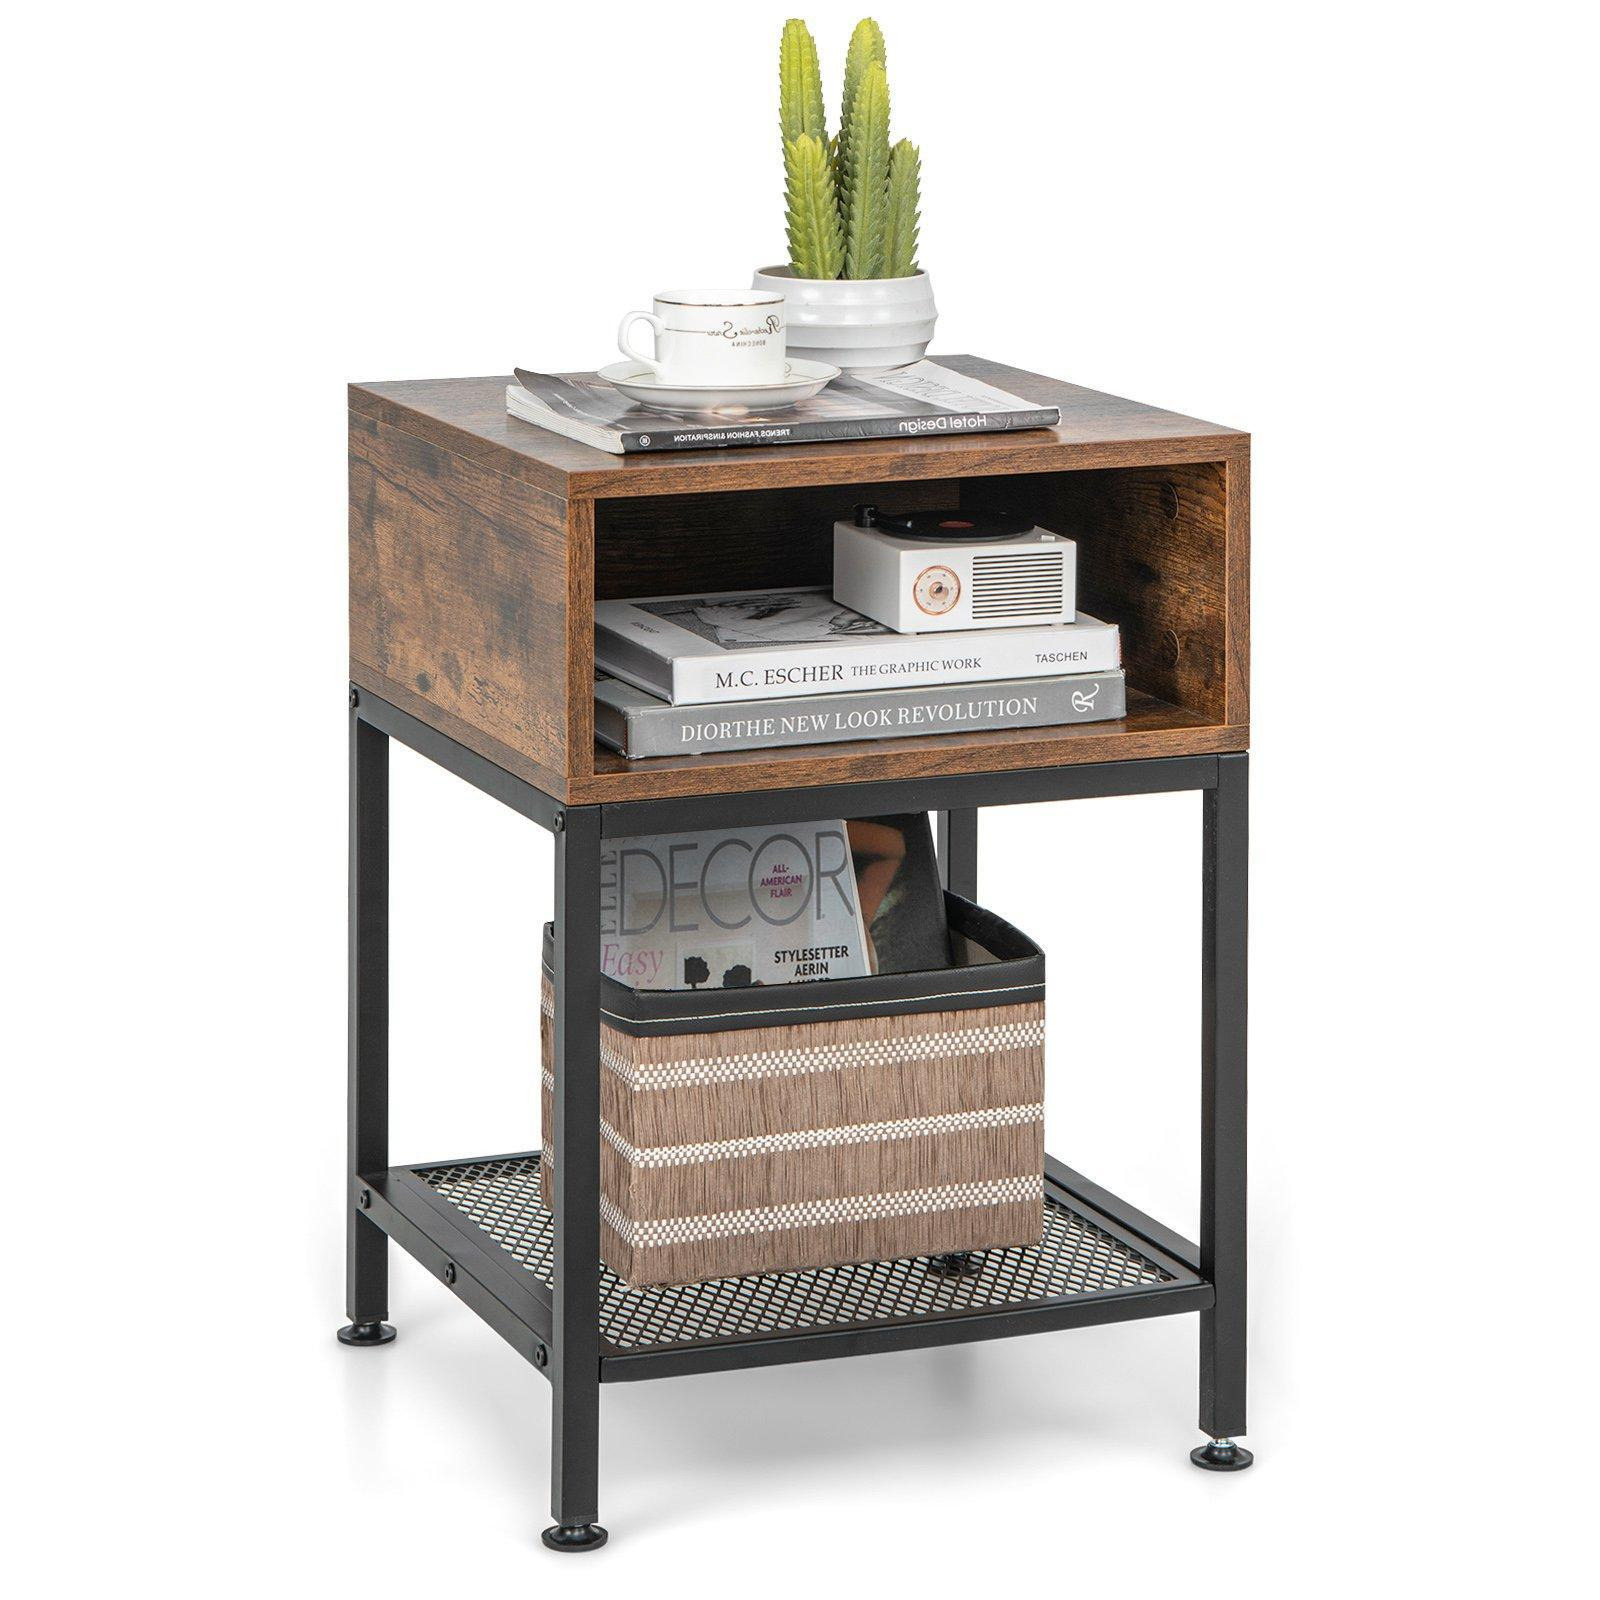 40cm Wood Top End Table w/ Metal Frame 3-tier Square Side Table w/ Storage Cube & Mesh Shelf - image 1